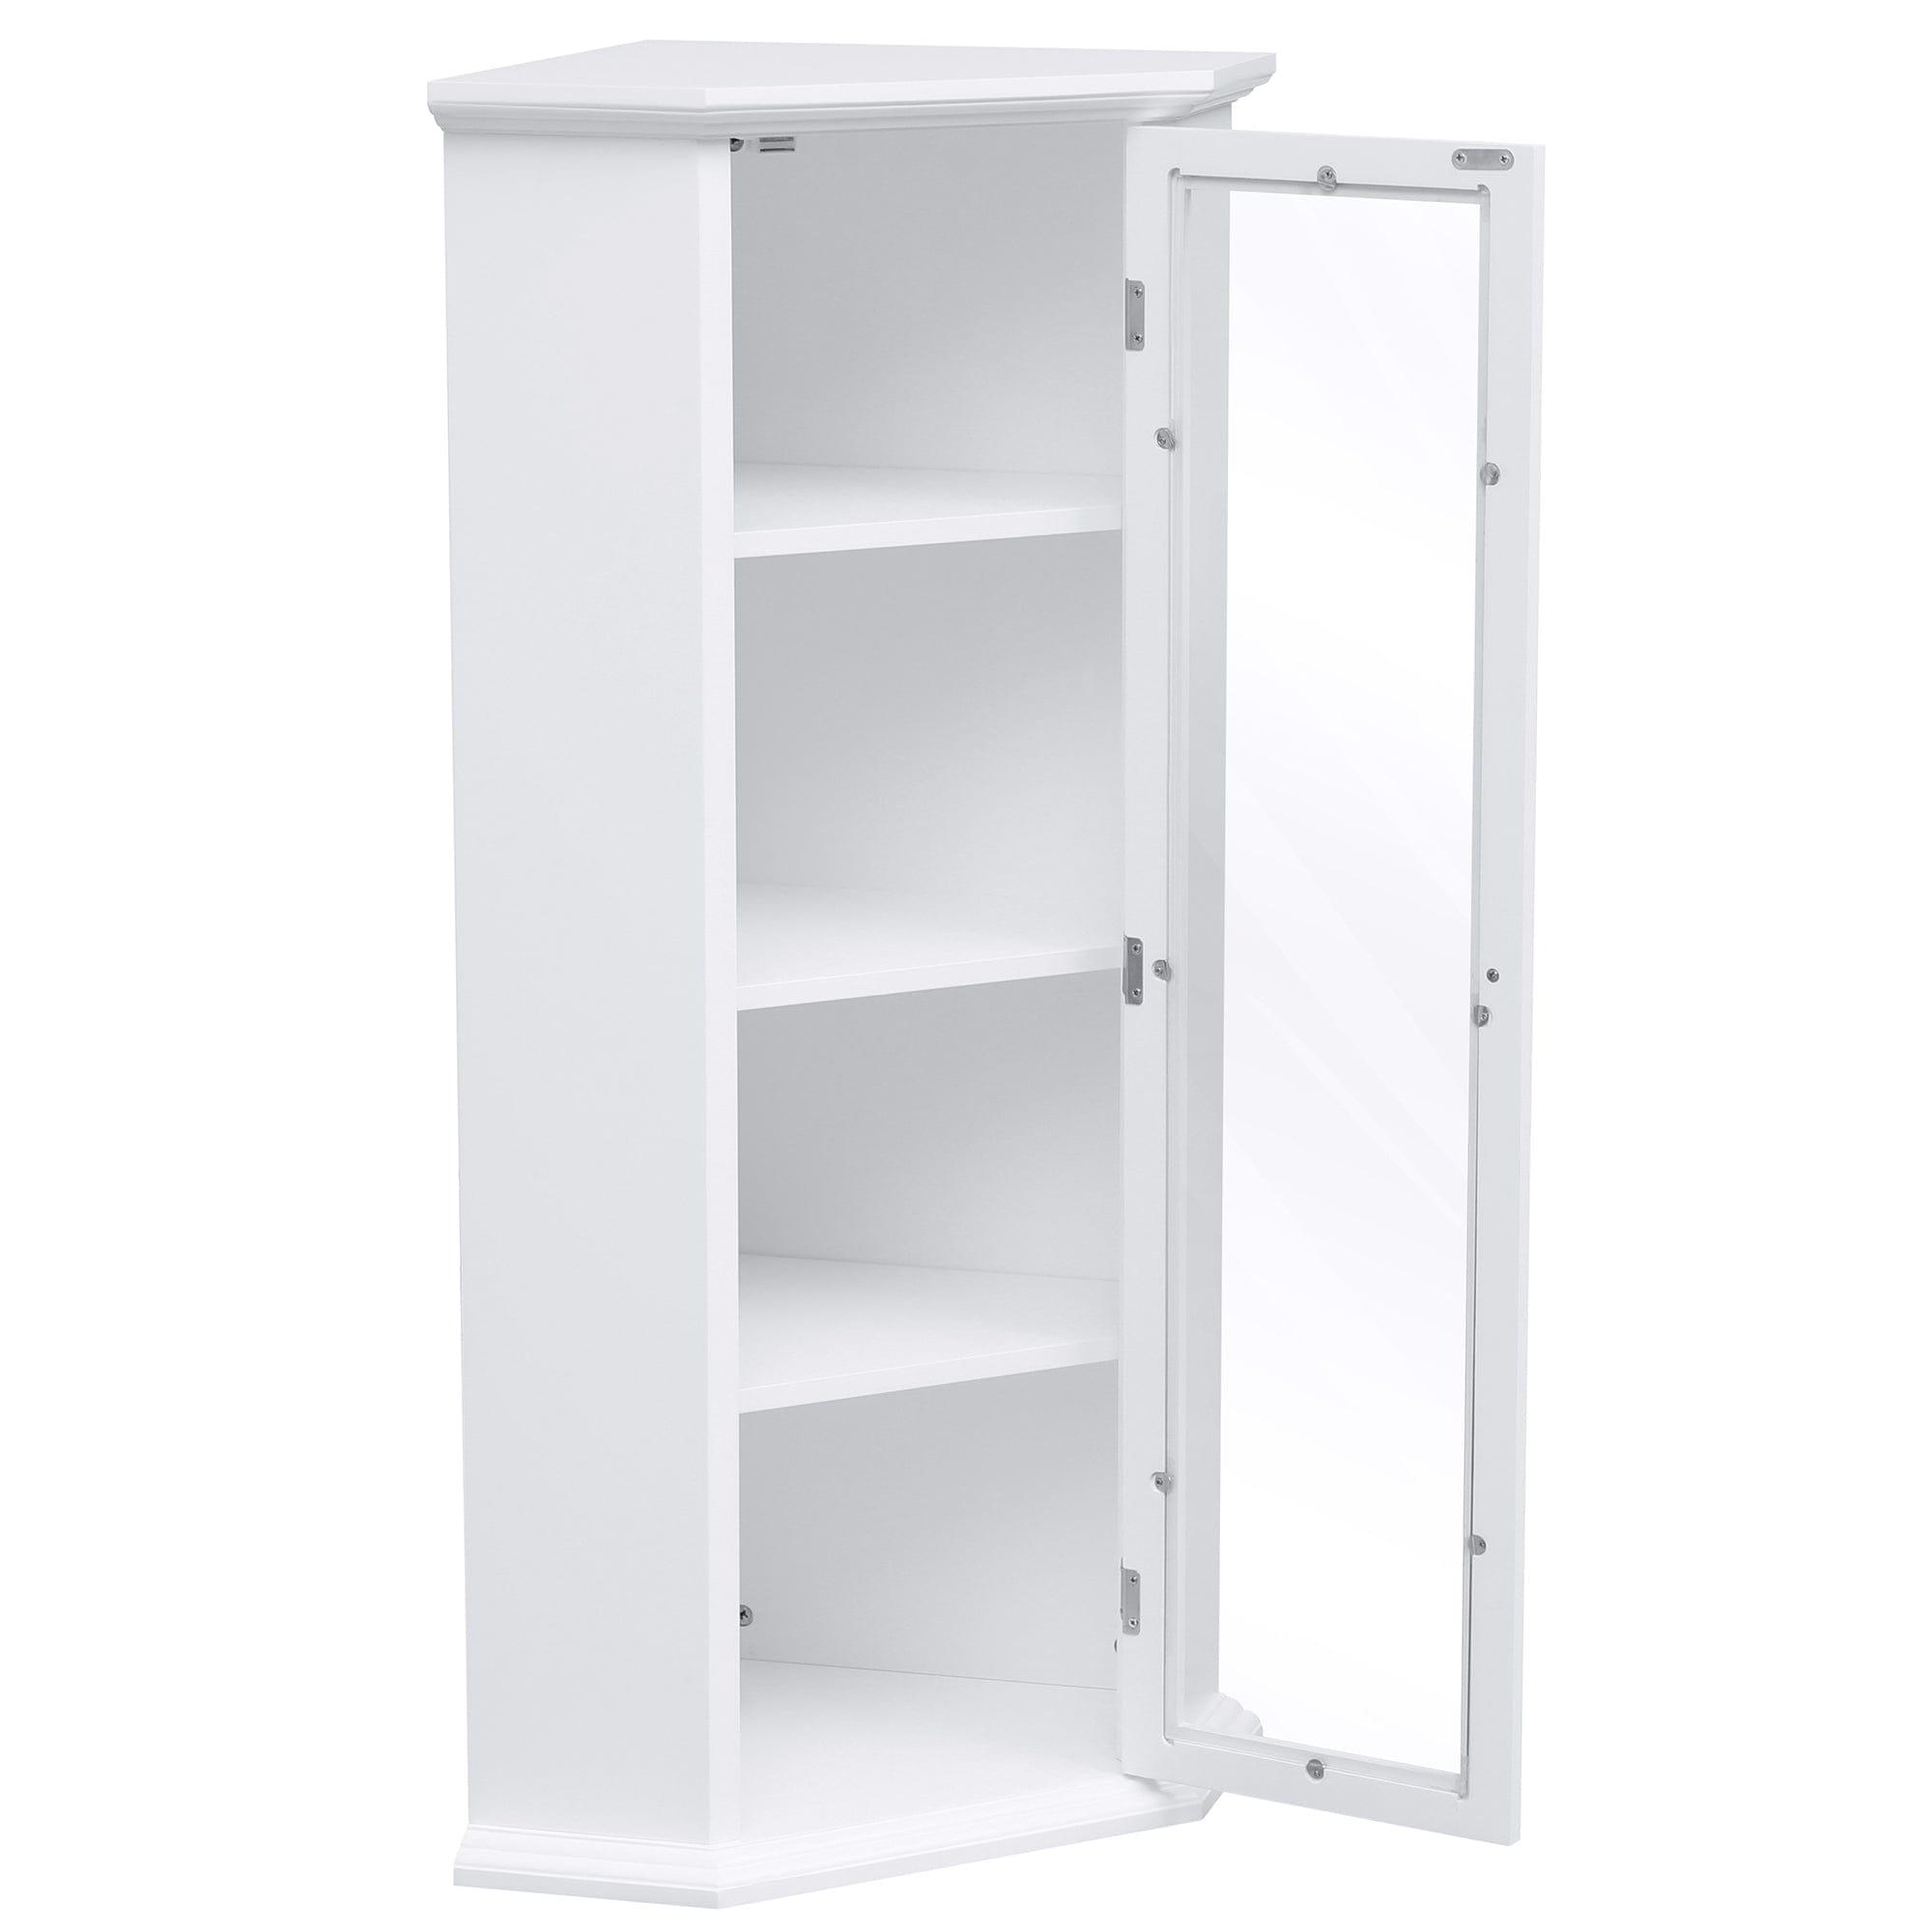 Shop Freestanding Bathroom Cabinet with Glass Door, Corner Storage Cabinet for Bathroom, Living Room and Kitchen, MDF Board with Painted Finish, White Mademoiselle Home Decor